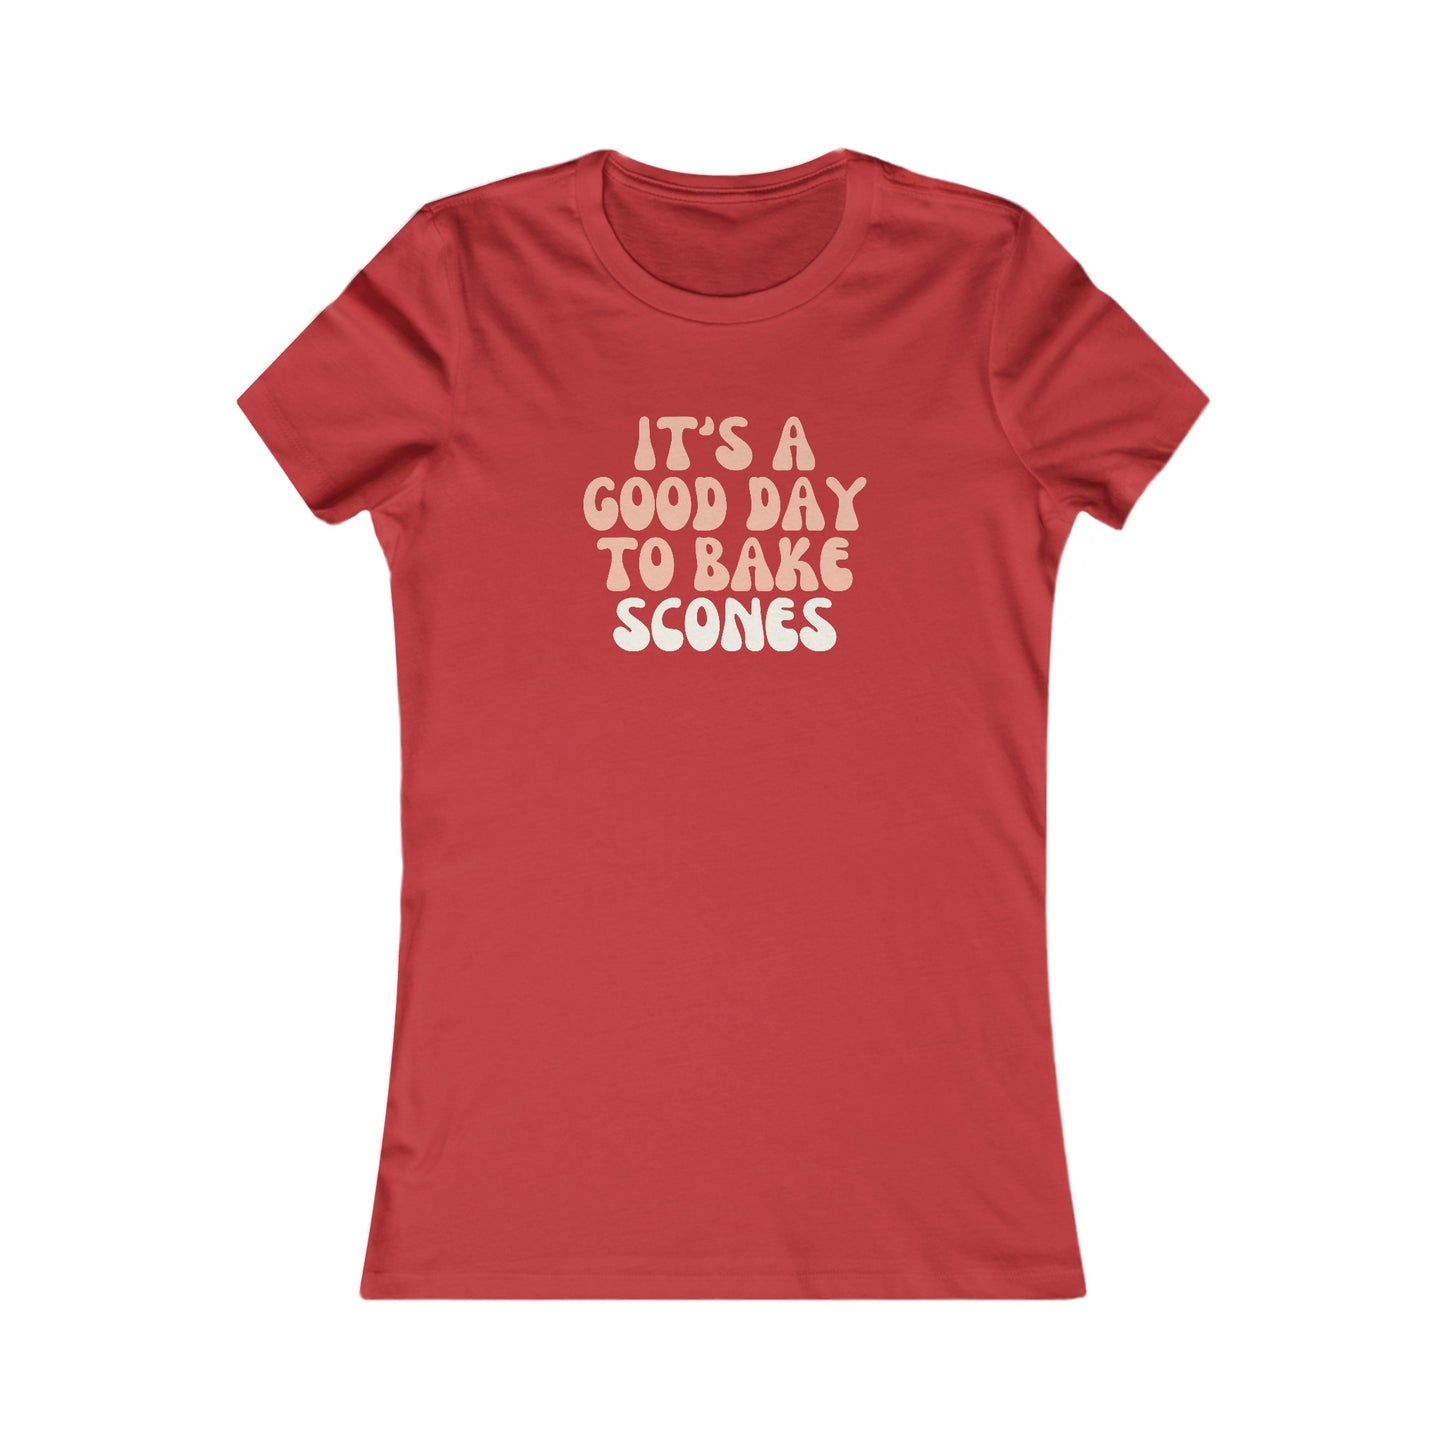 It's a Good Day to Bake Scones Women's T-Shirt